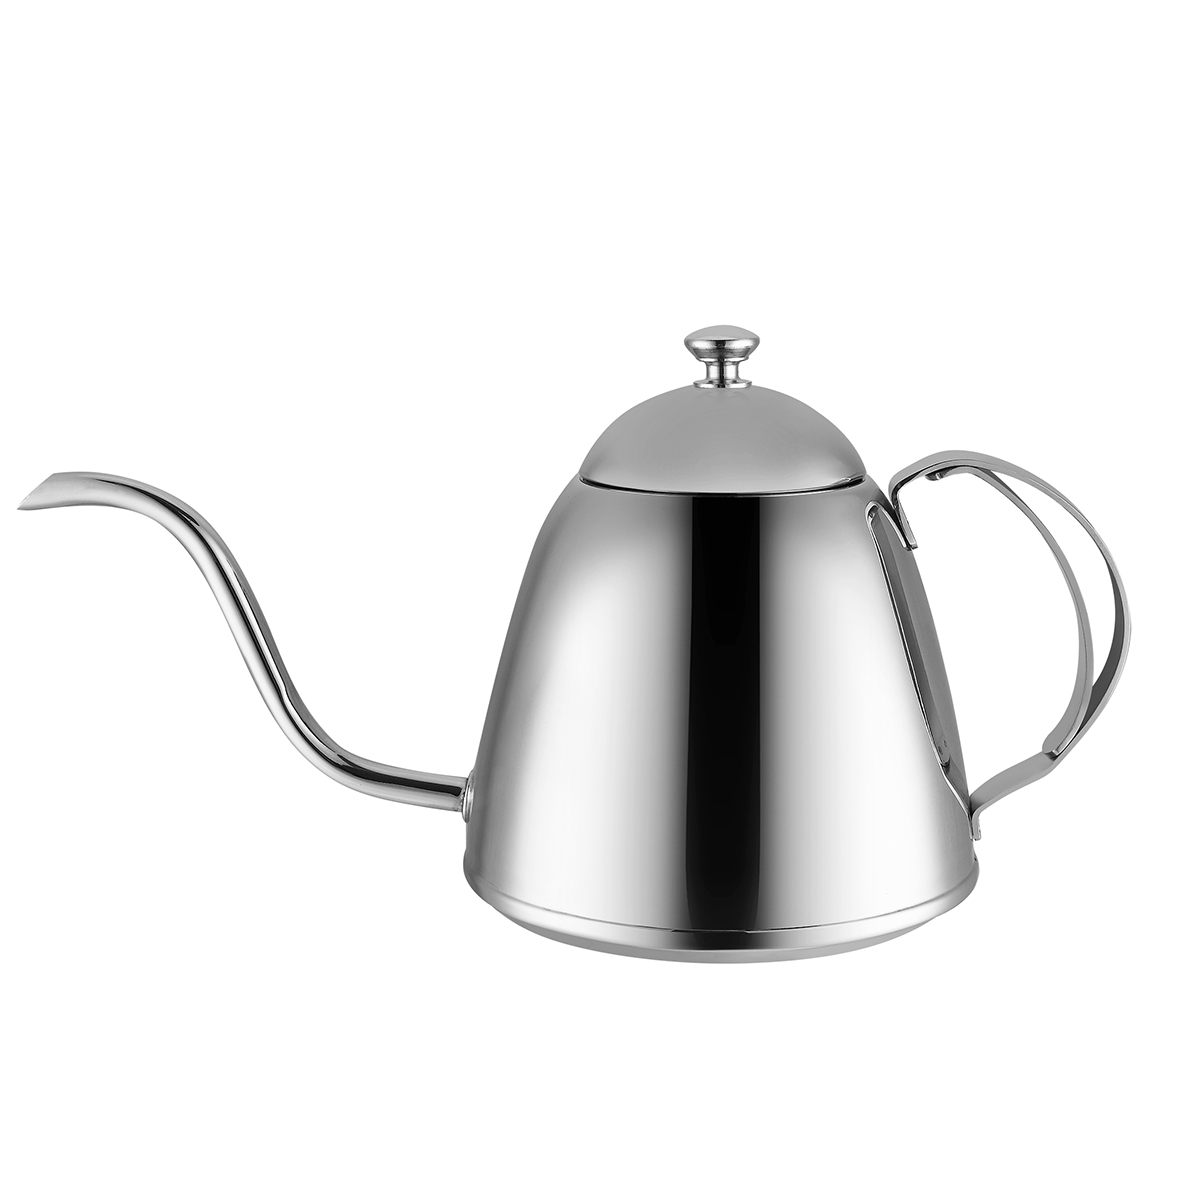 900ml Pour Over Stainless Steel Coffee Kettle with Stainless Steel Handle